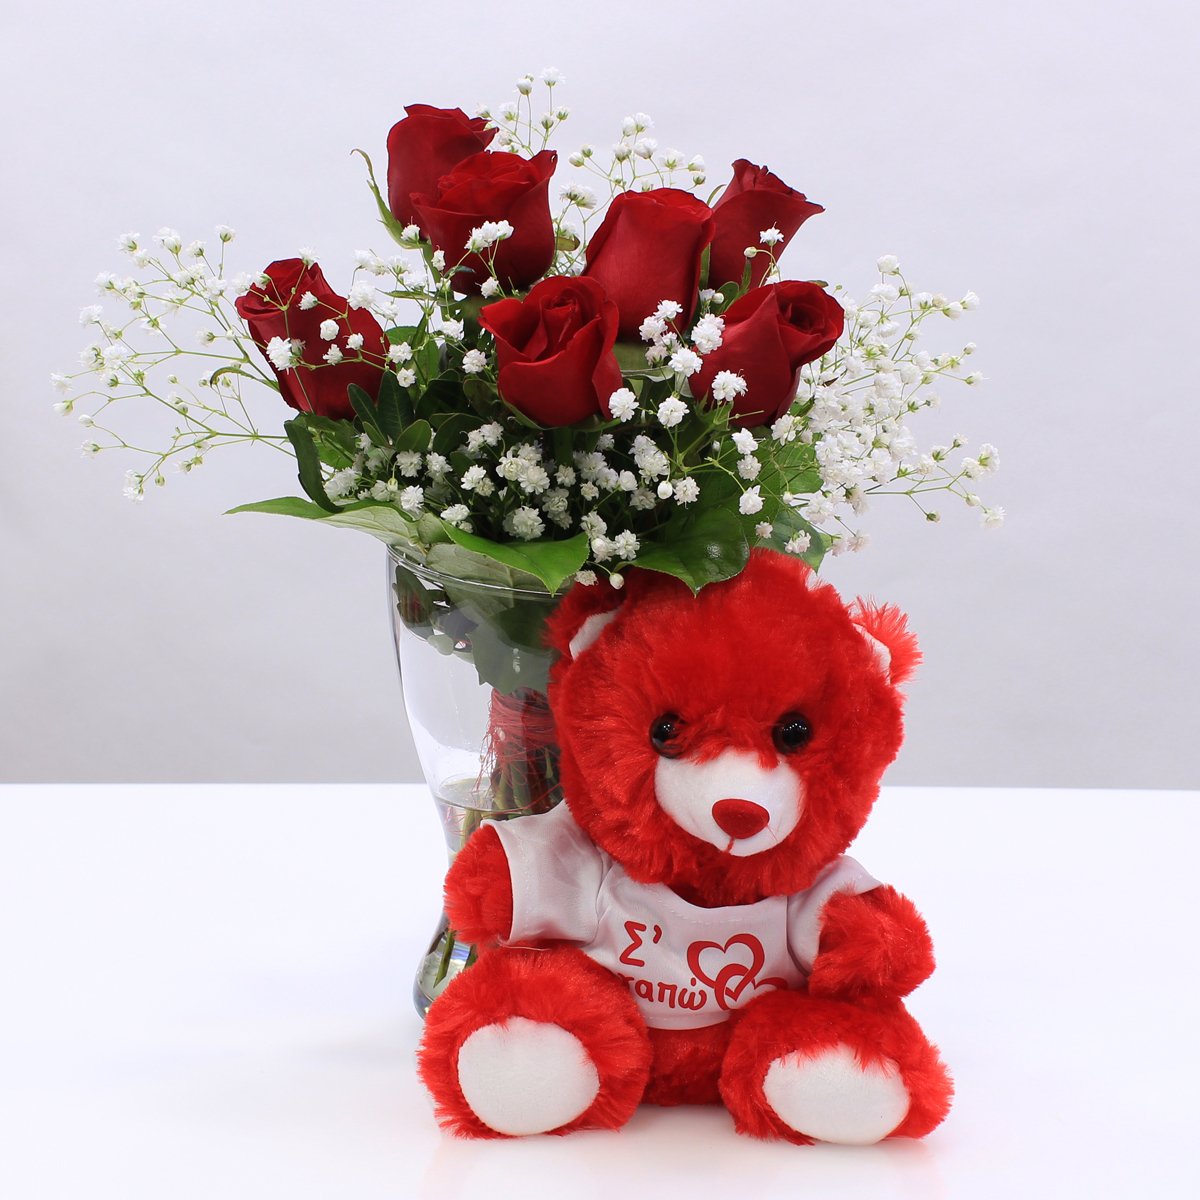 Bouquet with red roses and tedy!